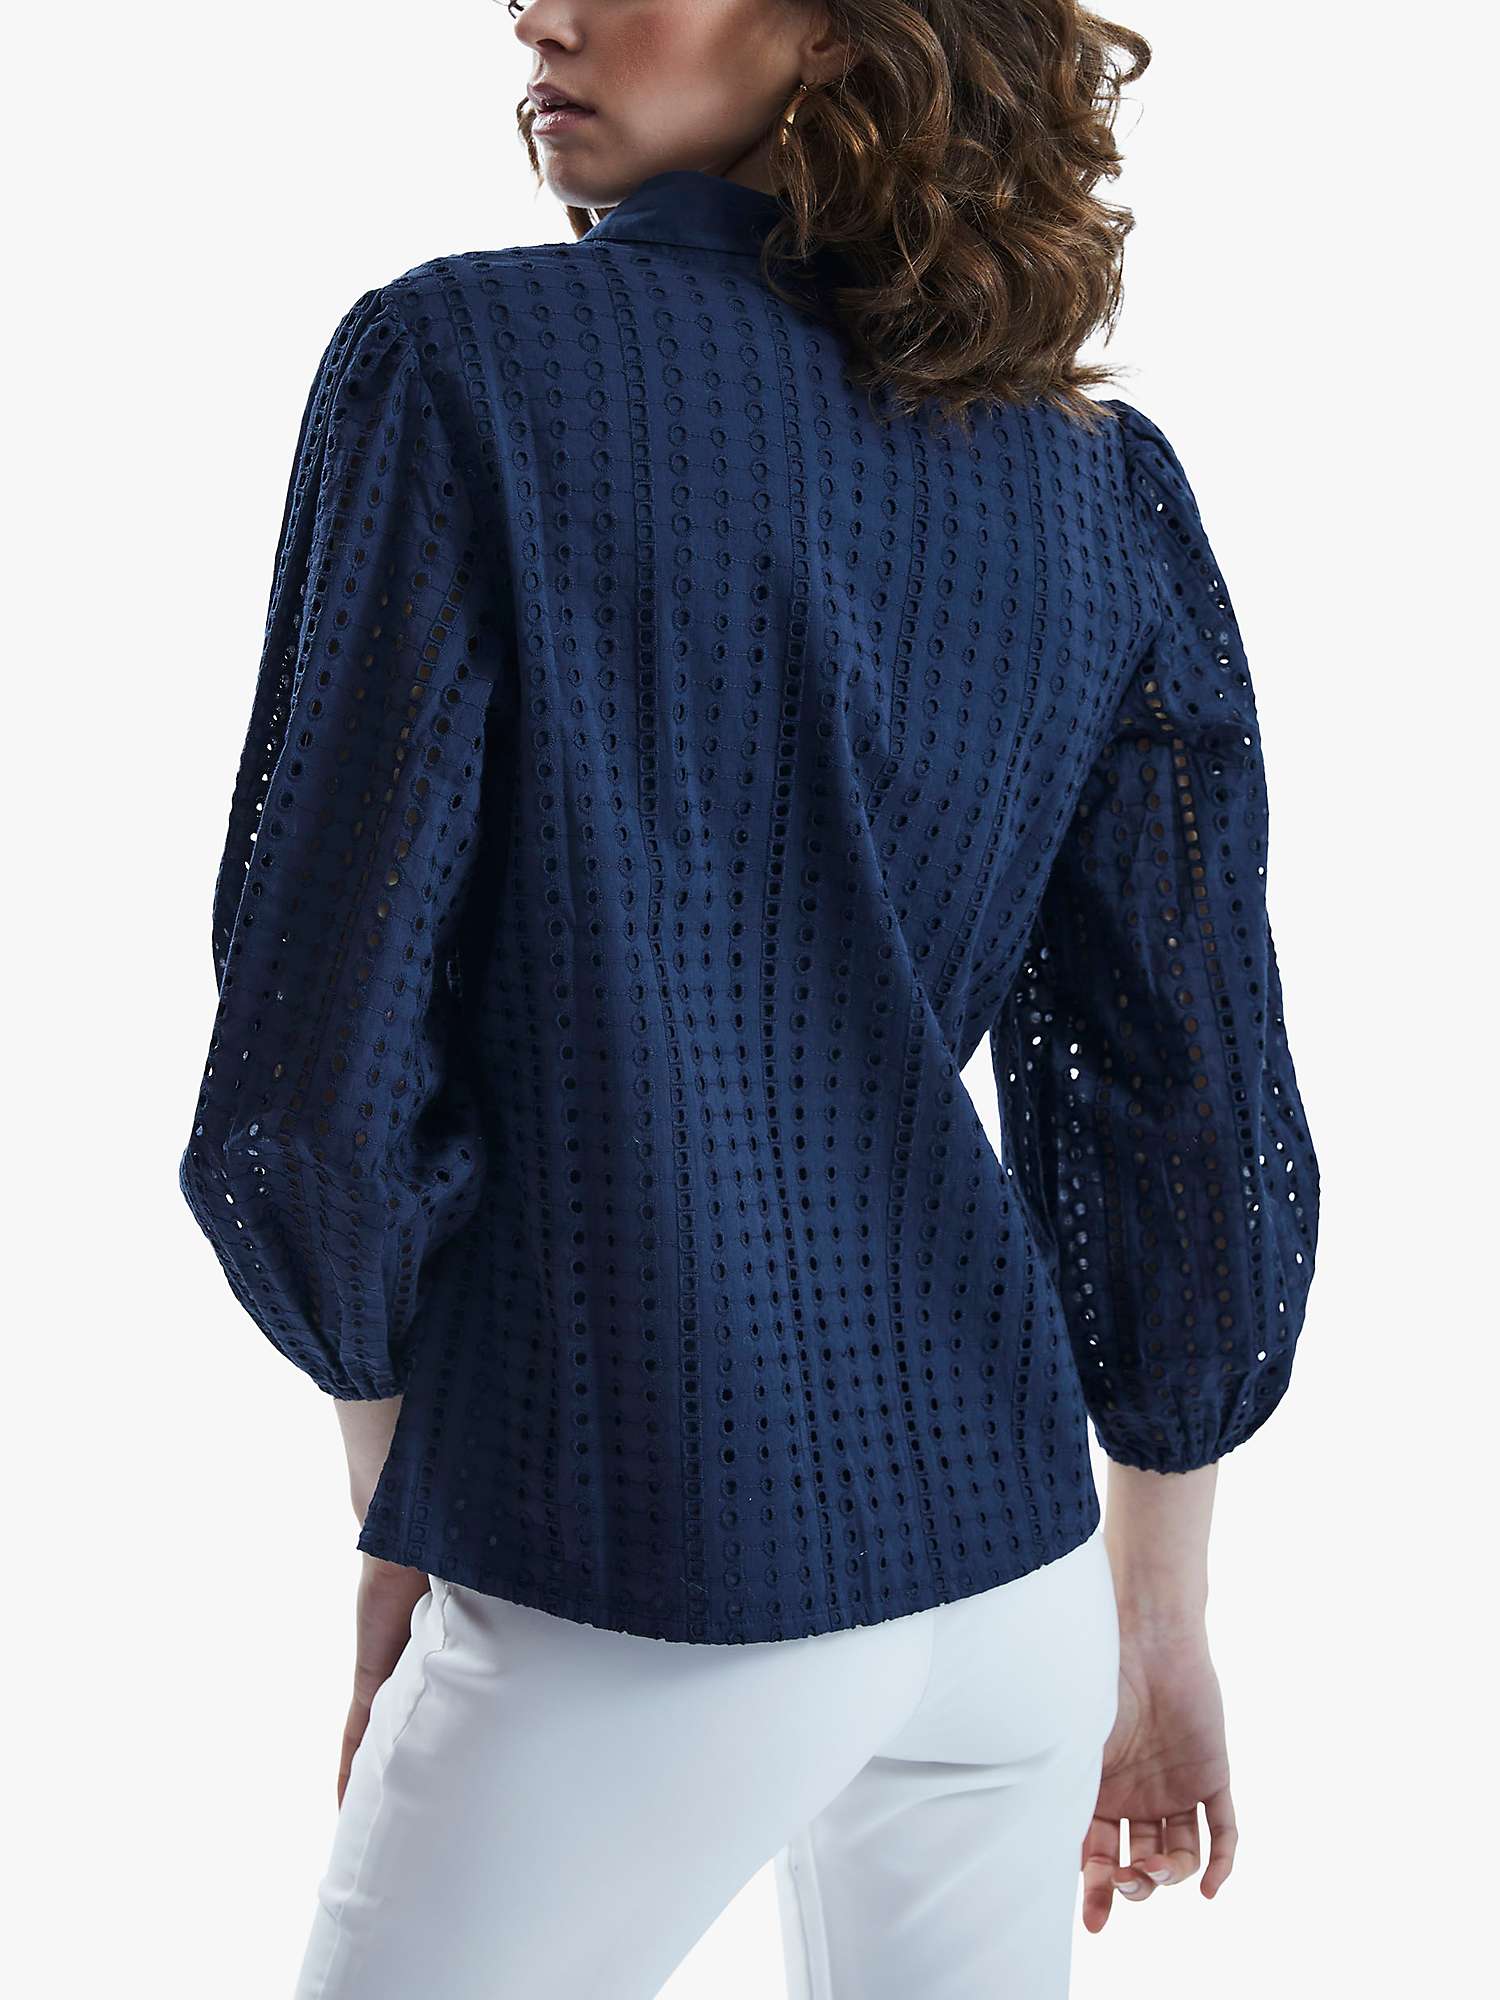 Buy James Lakeland Broderie Anglaise Shirt, Navy Online at johnlewis.com